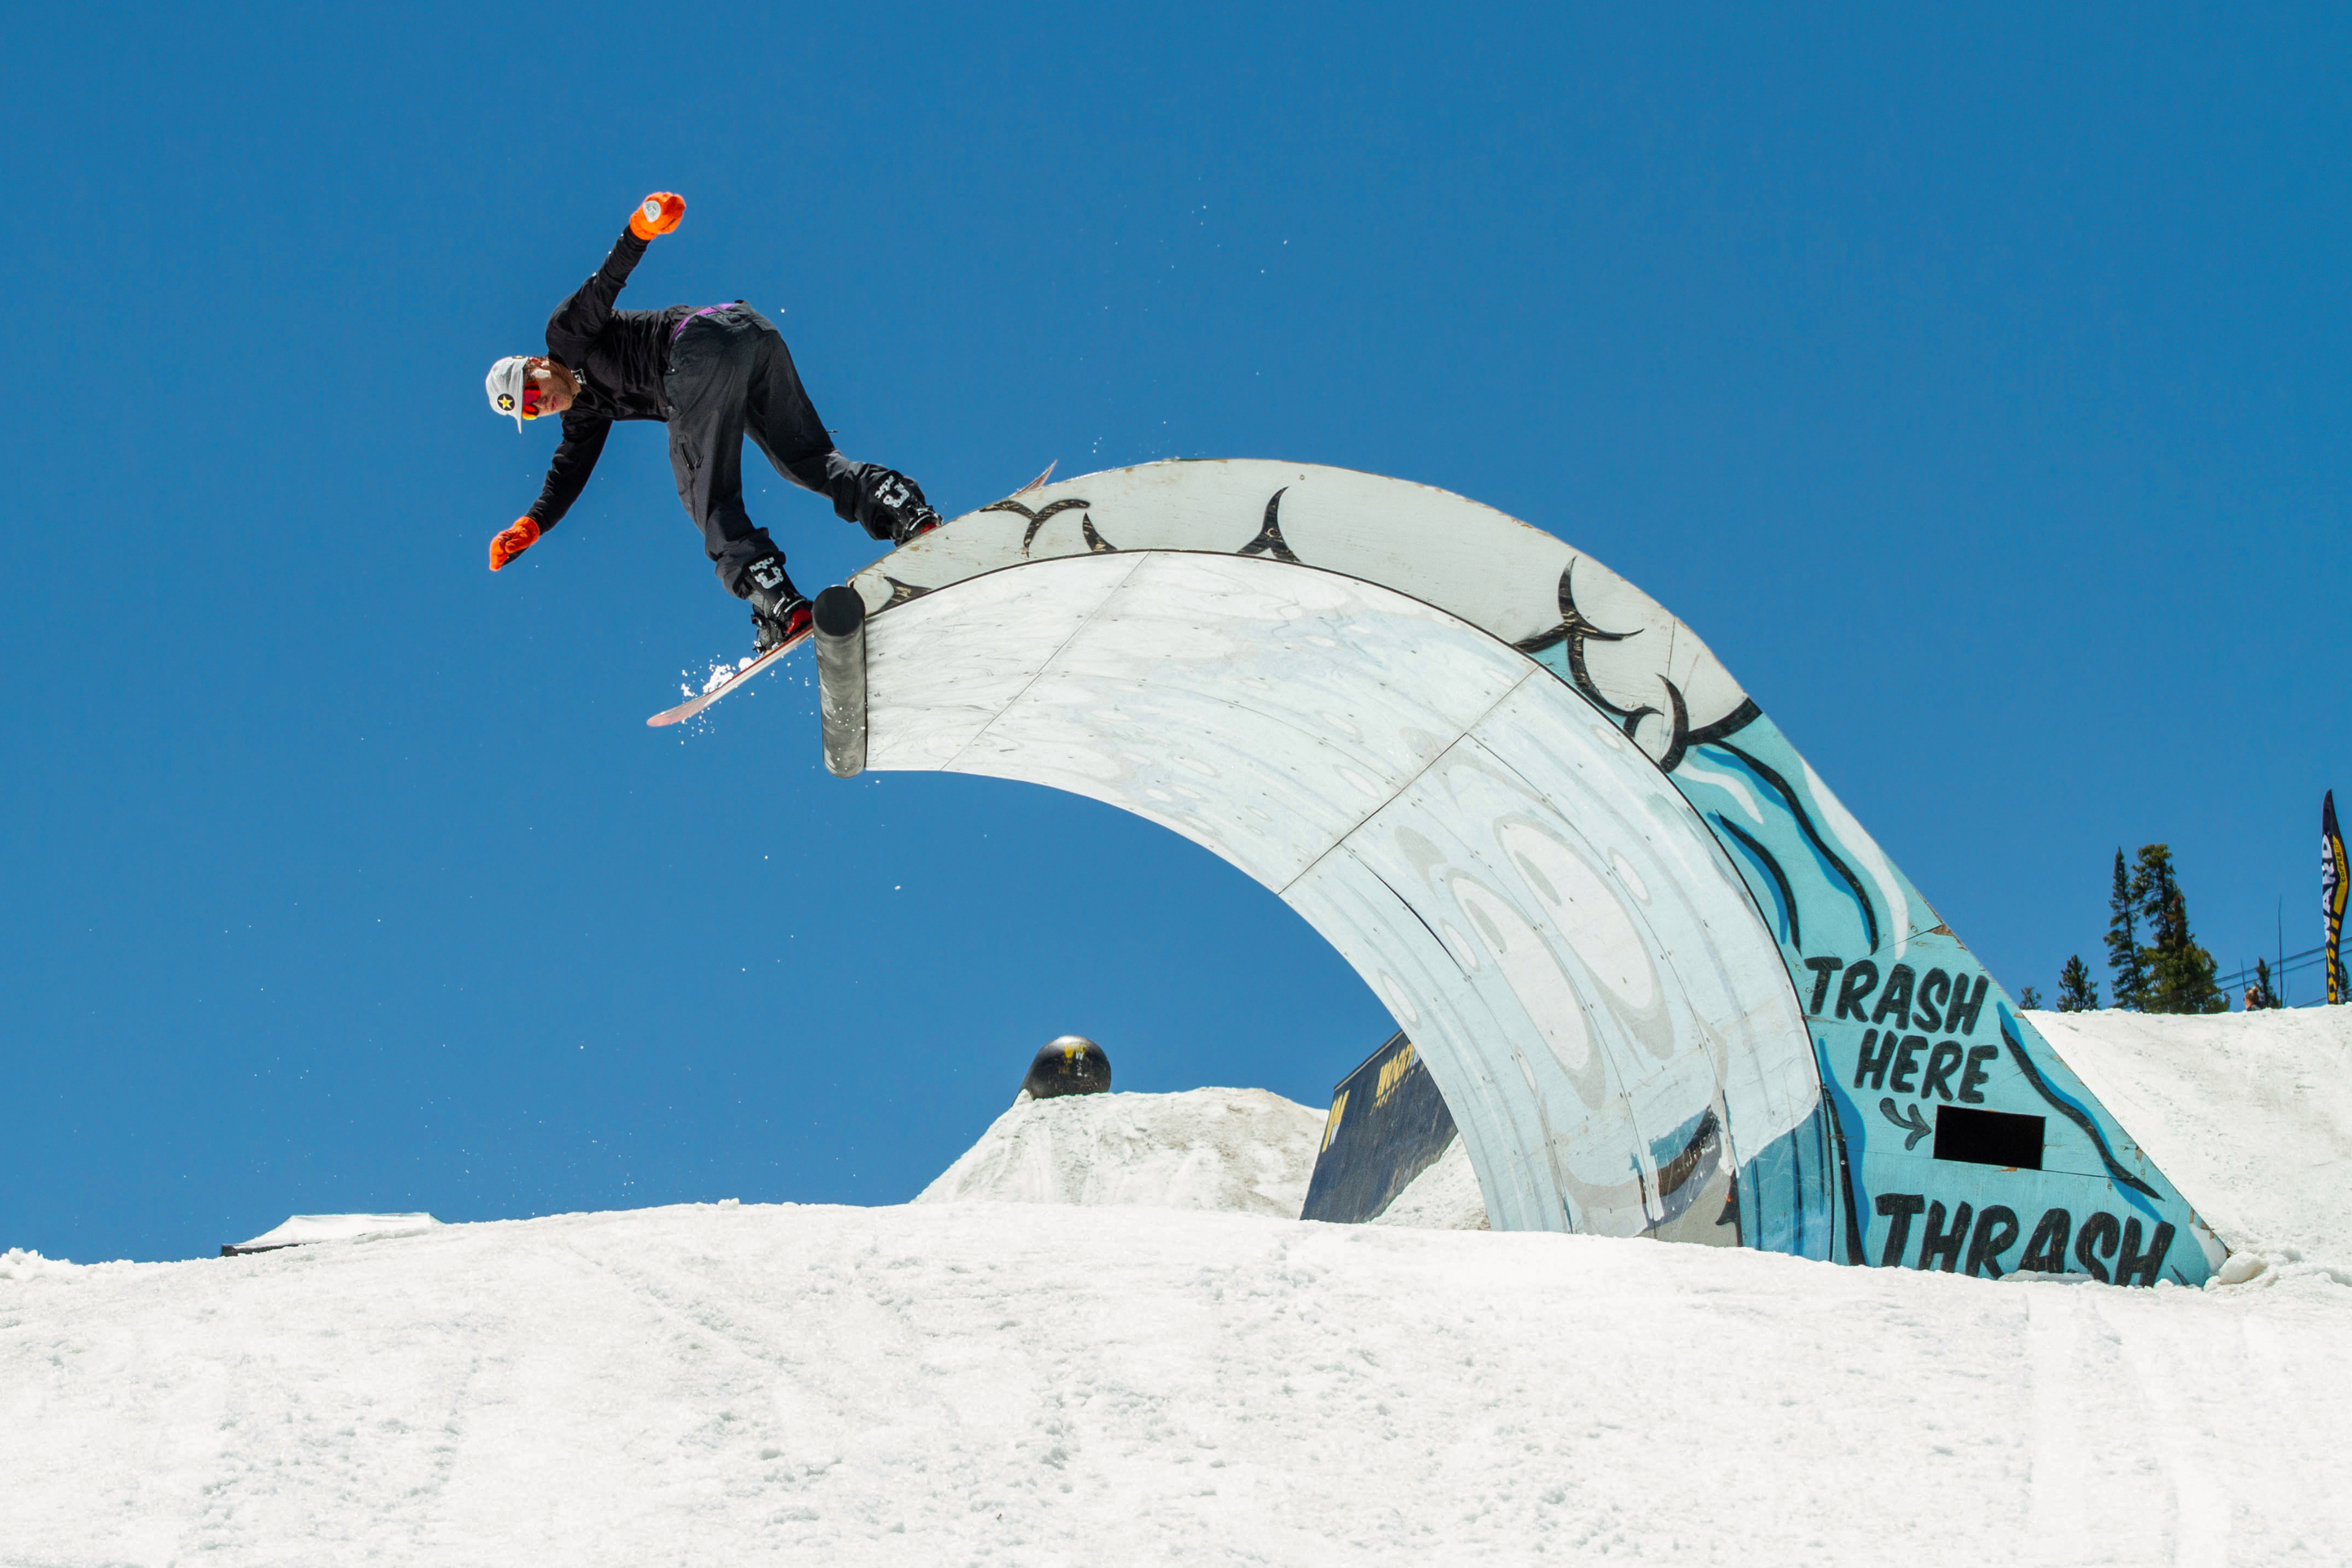 Bibliografie Artistiek Pardon Torstein Horgmo, Dylan Alito, Scotty Stevens and More will be at Woodward  Copper this Summer – Snowboard Magazine